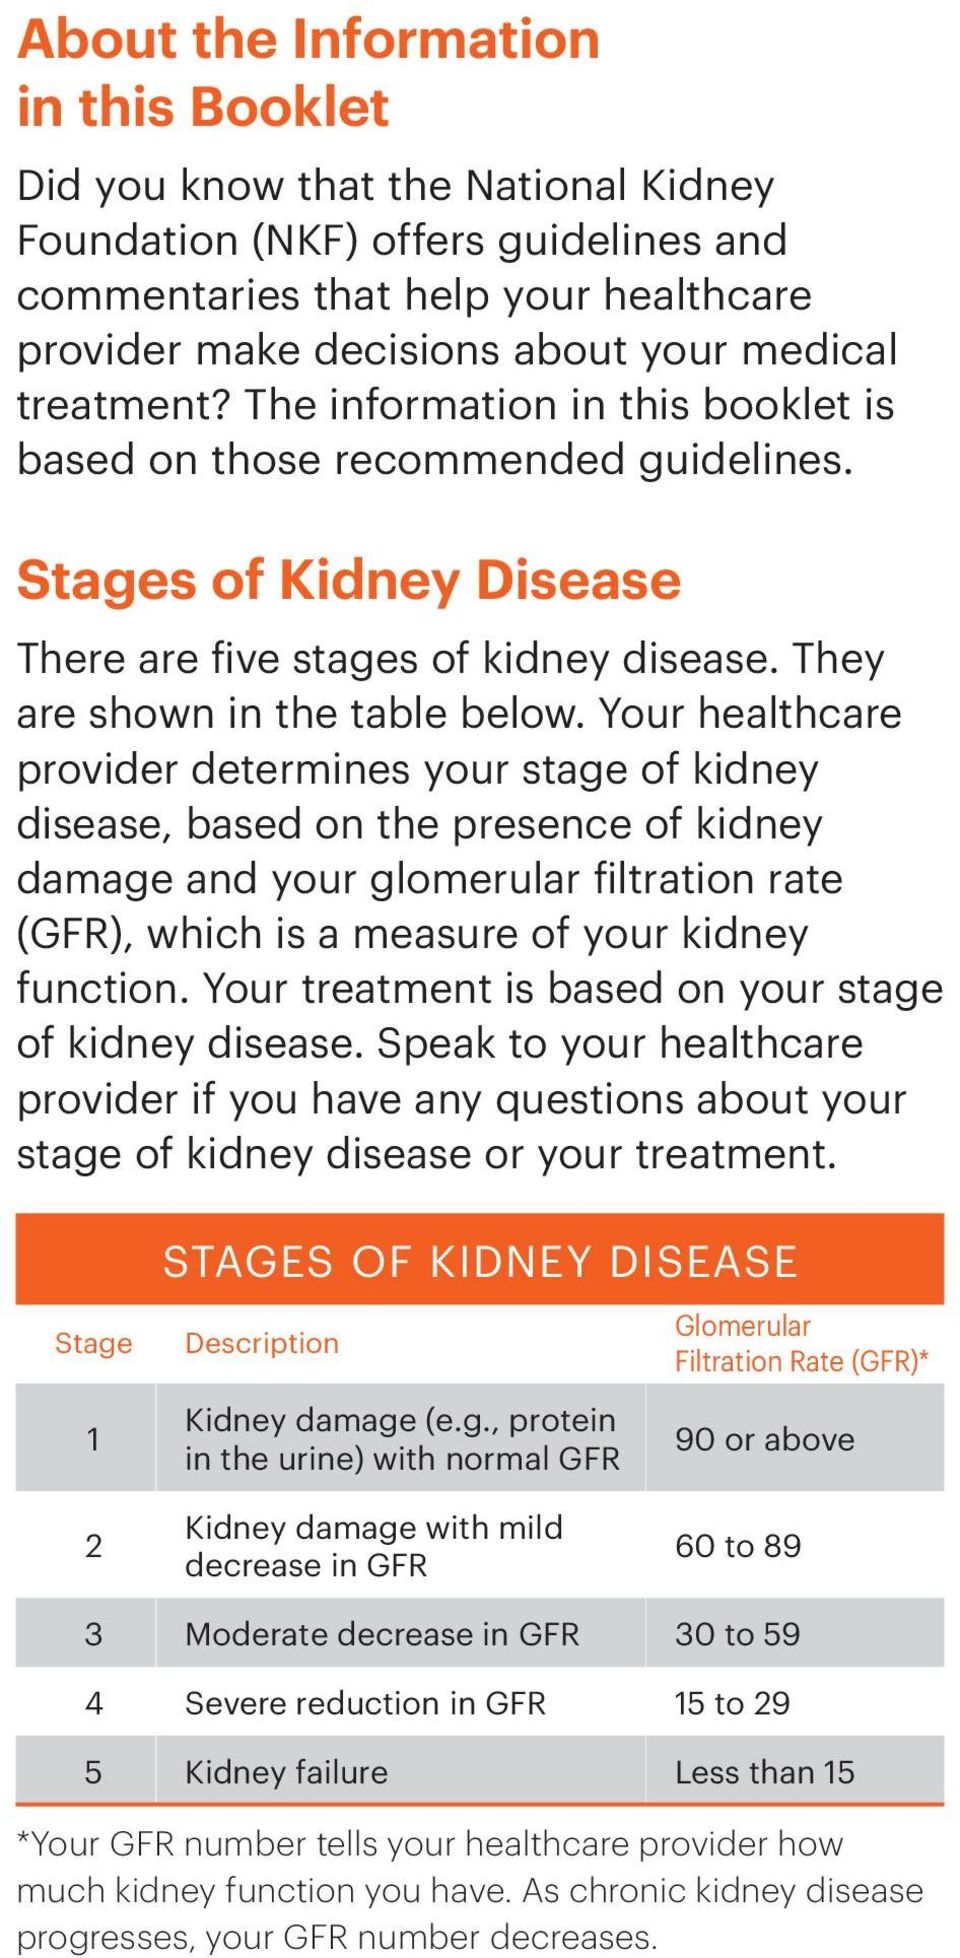 Your healthcare provider determines your stage of kidney disease, based on the presence of kidney damage and your glomerular filtration rate (GFR), which is a measure of your kidney function.